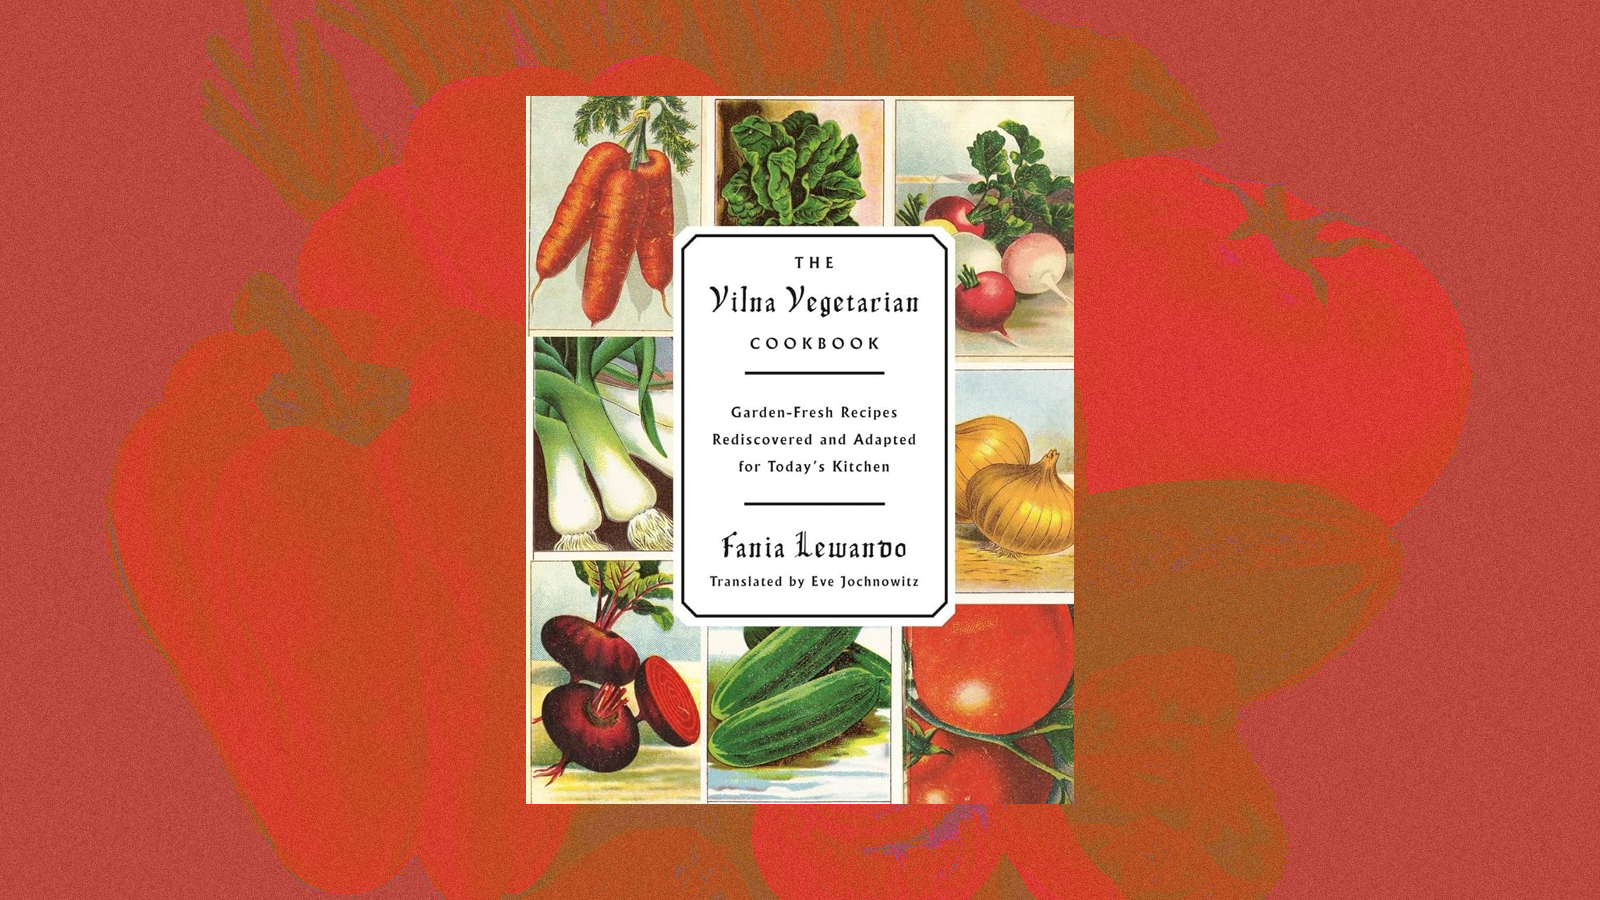 The cover of the Vilna Vegetarian Cookbook.